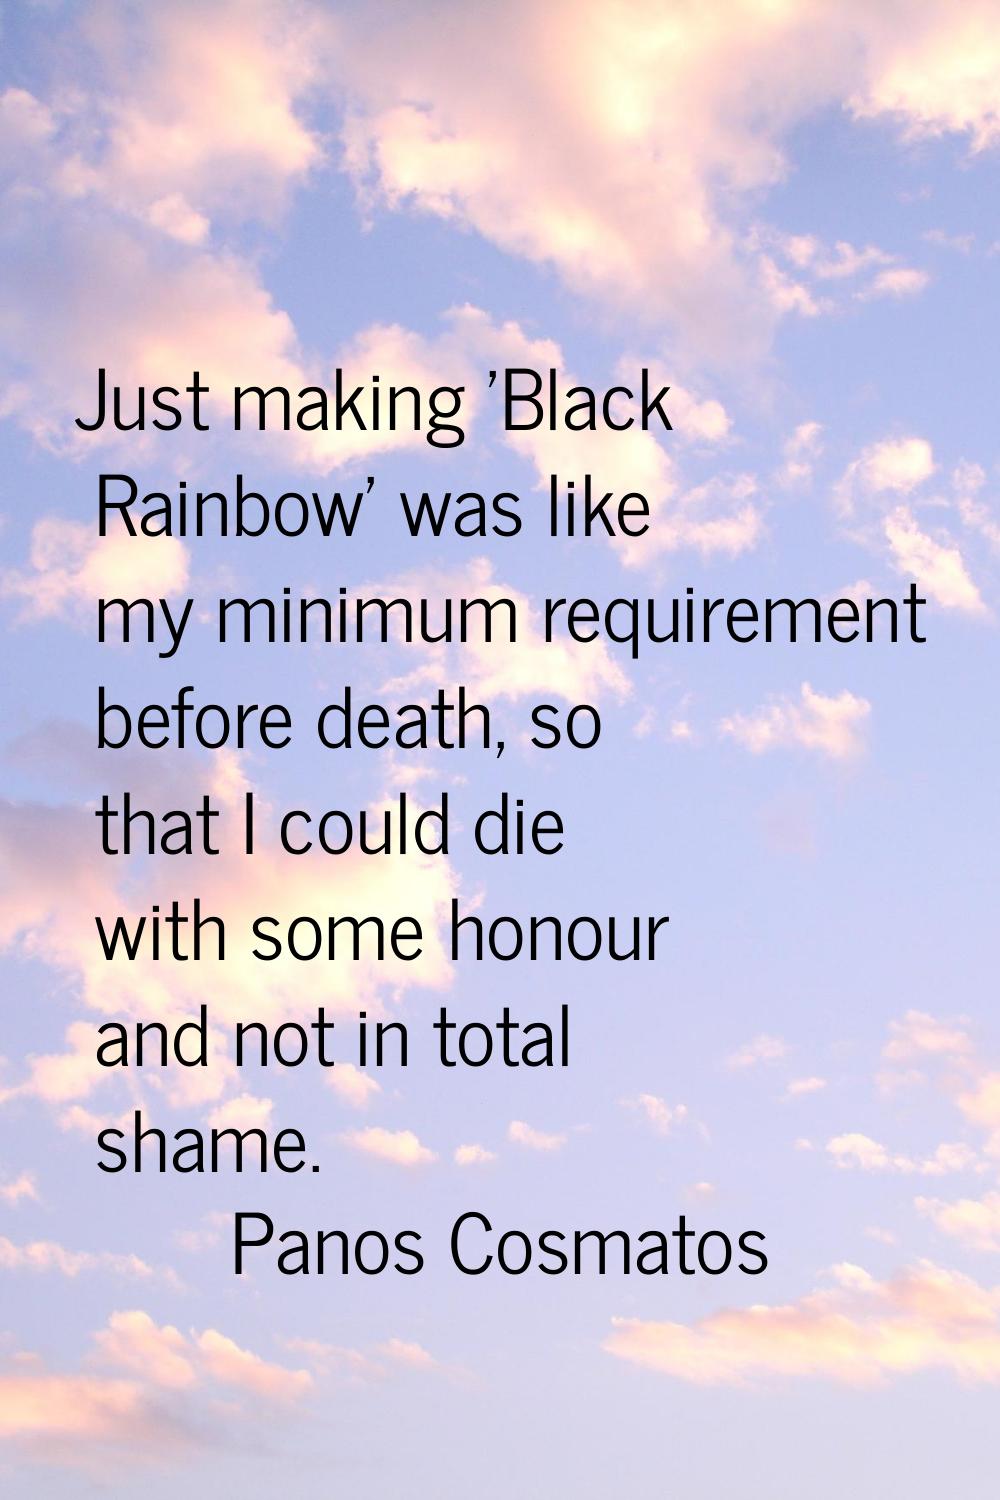 Just making 'Black Rainbow' was like my minimum requirement before death, so that I could die with 